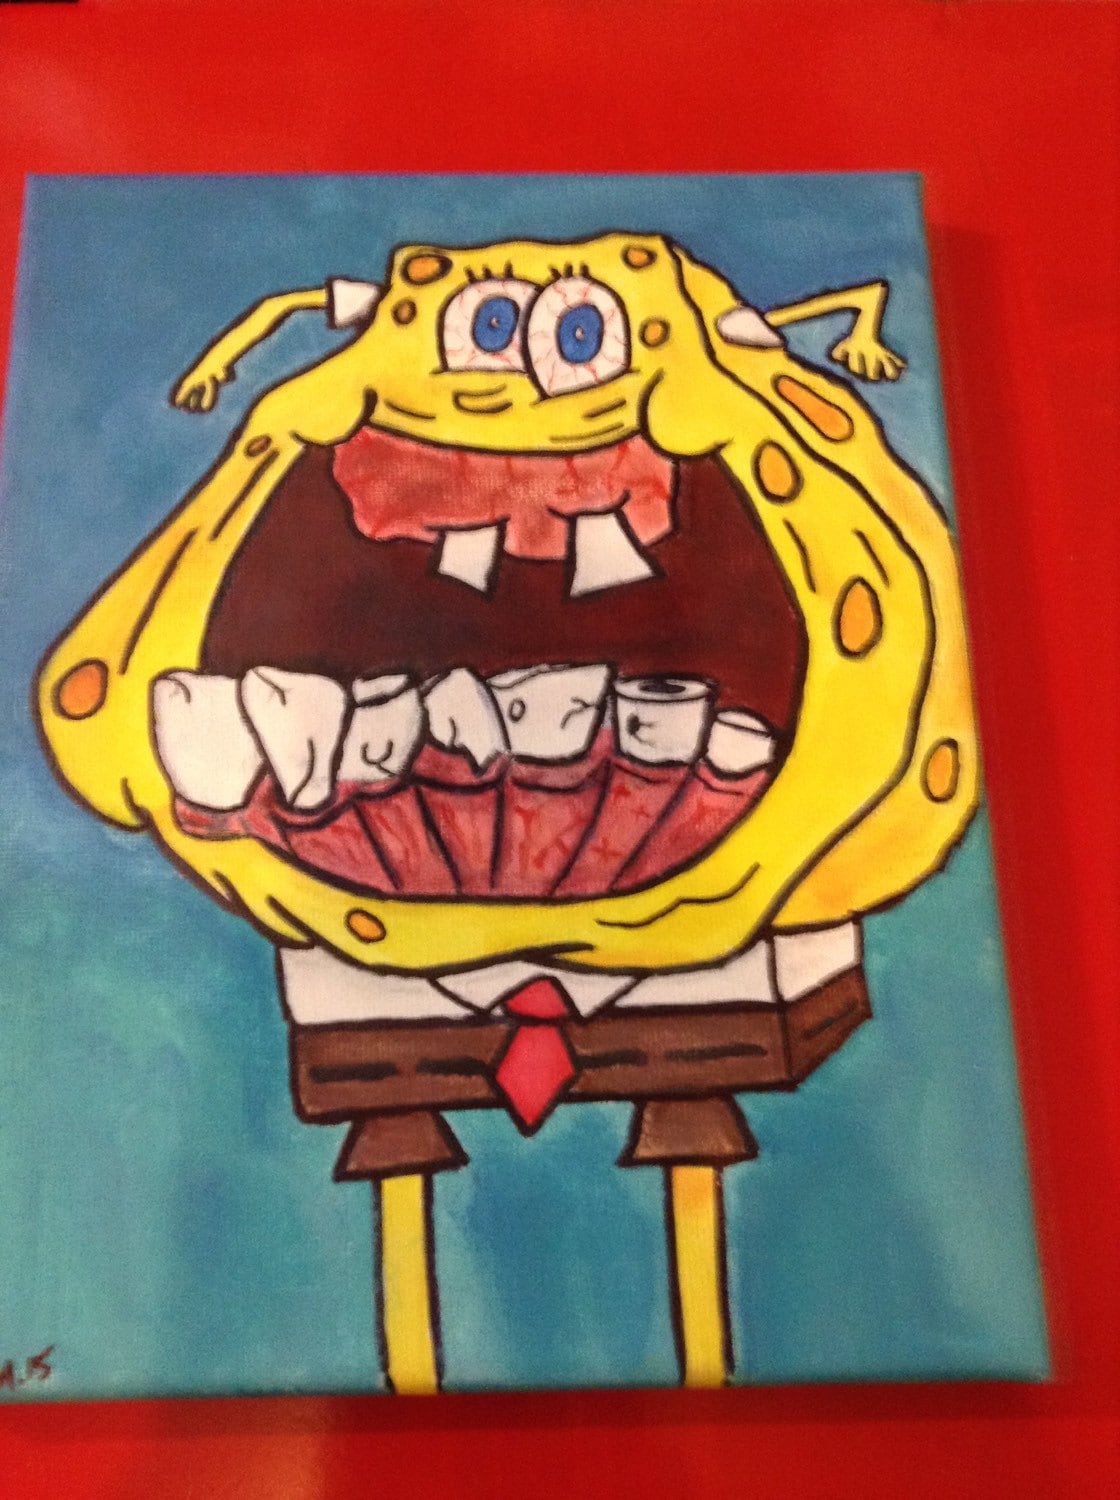 Funny face spongebob original painting by Aaron by cartoonpopart